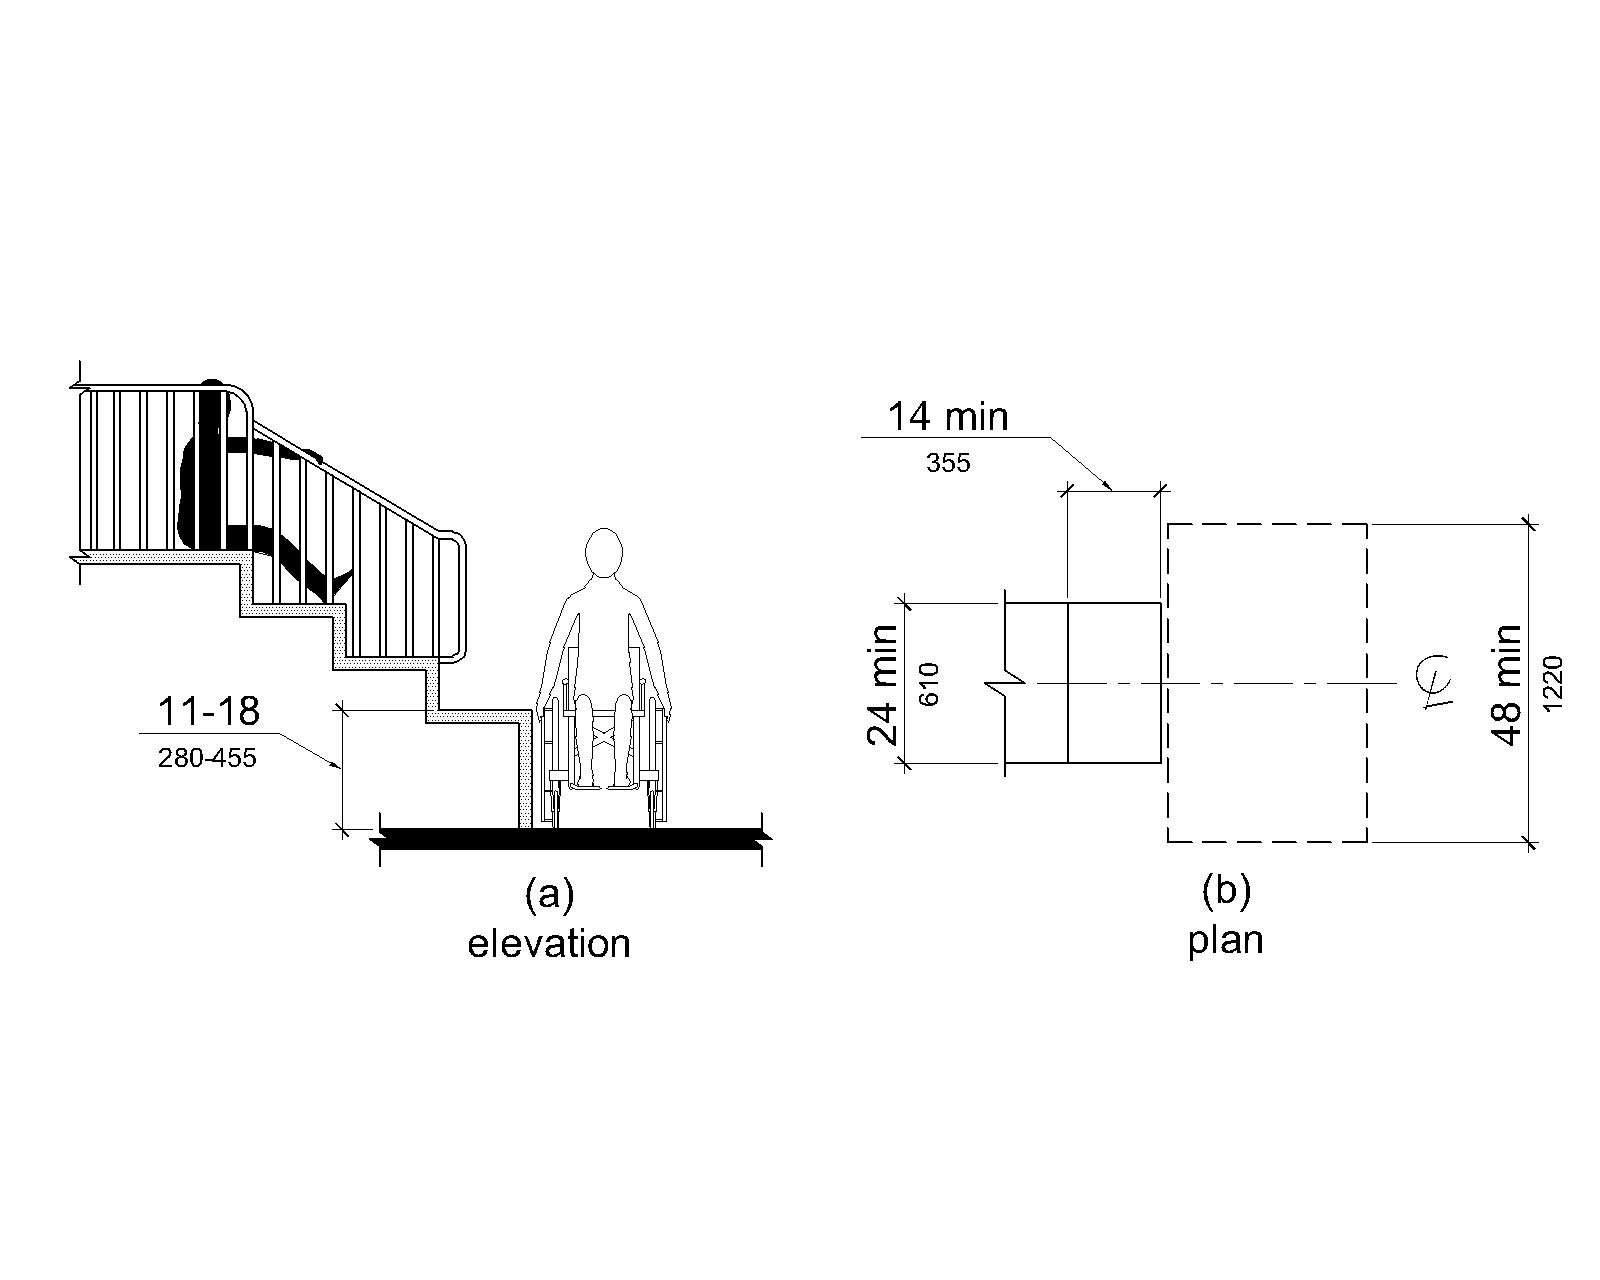 Figure (a) is an elevation drawing showing a transfer platform with a surface height 11 to 18 inches (280 to 455 mm) above the deck surface.Figure (b) is a plan view of the platform having a depth of 14 inches (355 mm) minimum and a width of 24 inches (610 mm) minimum.A clear deck space that is 48 inches (1220 mm) long minimum is centered on this dimension parallel to the 24 in (610 mm) minimum long unobstructed side of the transfer platform.